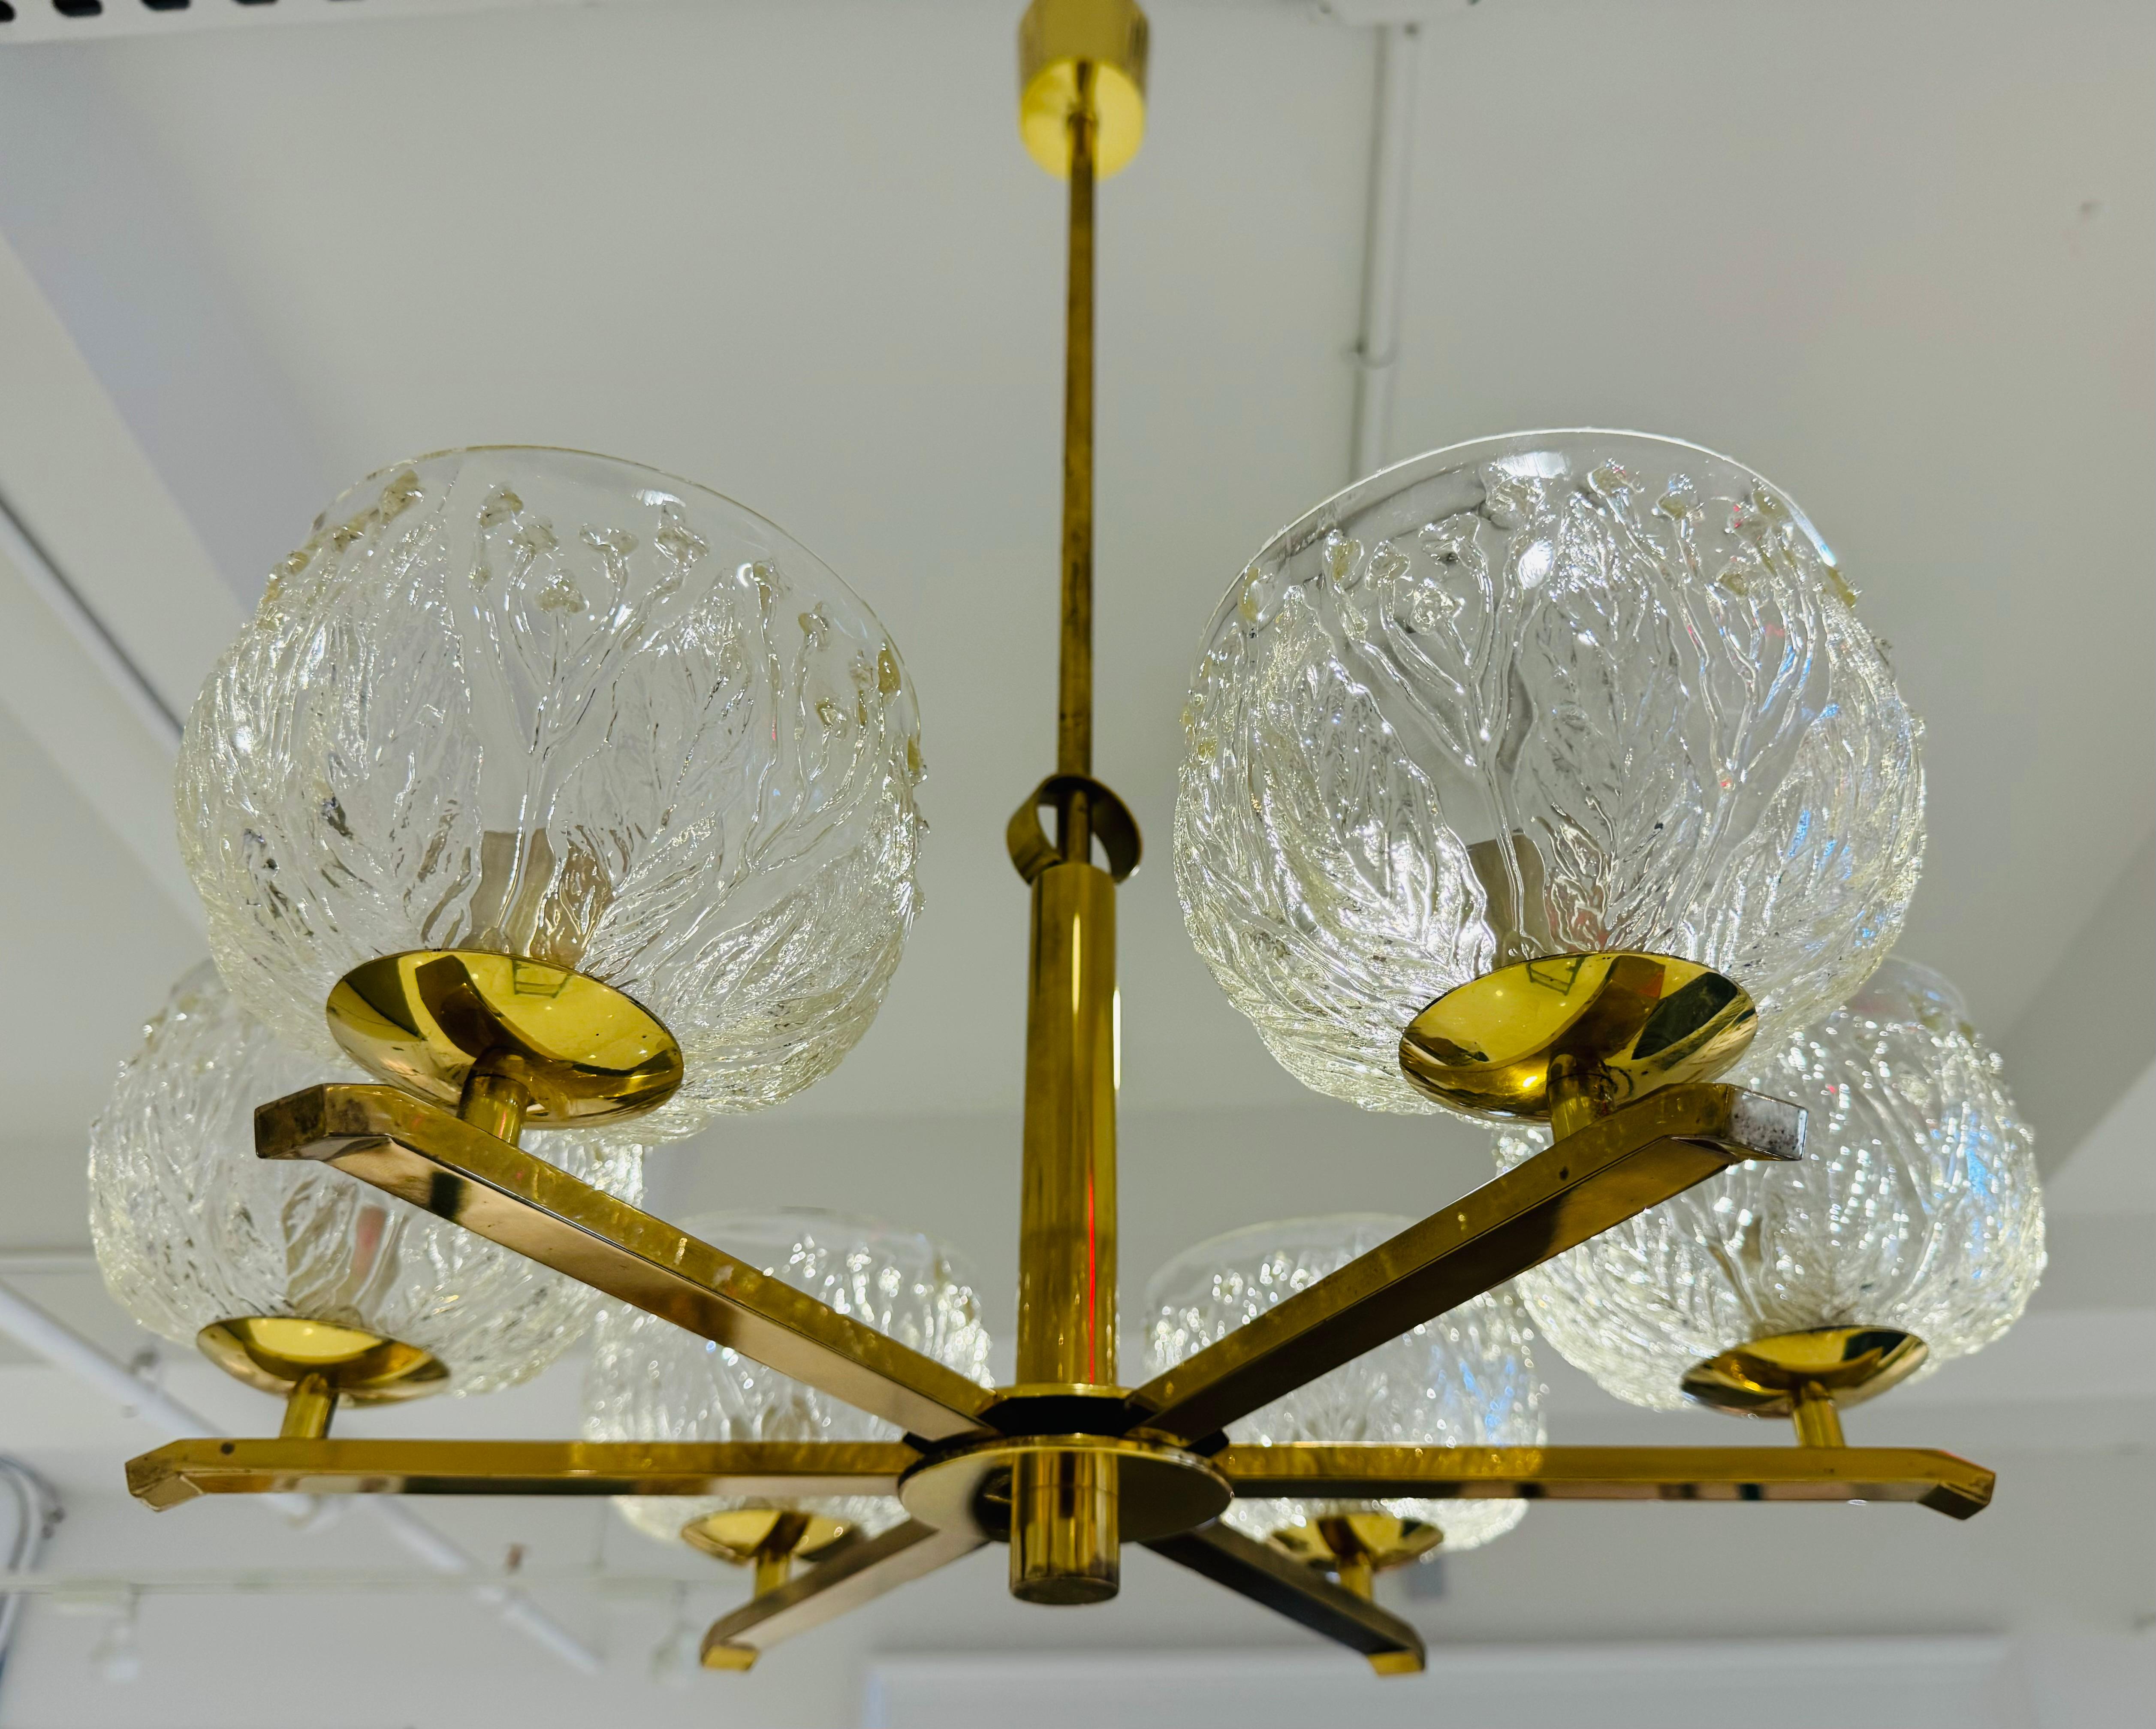 A rare 1970s Swedish six light polished brass pendant with floral molded glass shades. Rewired. 